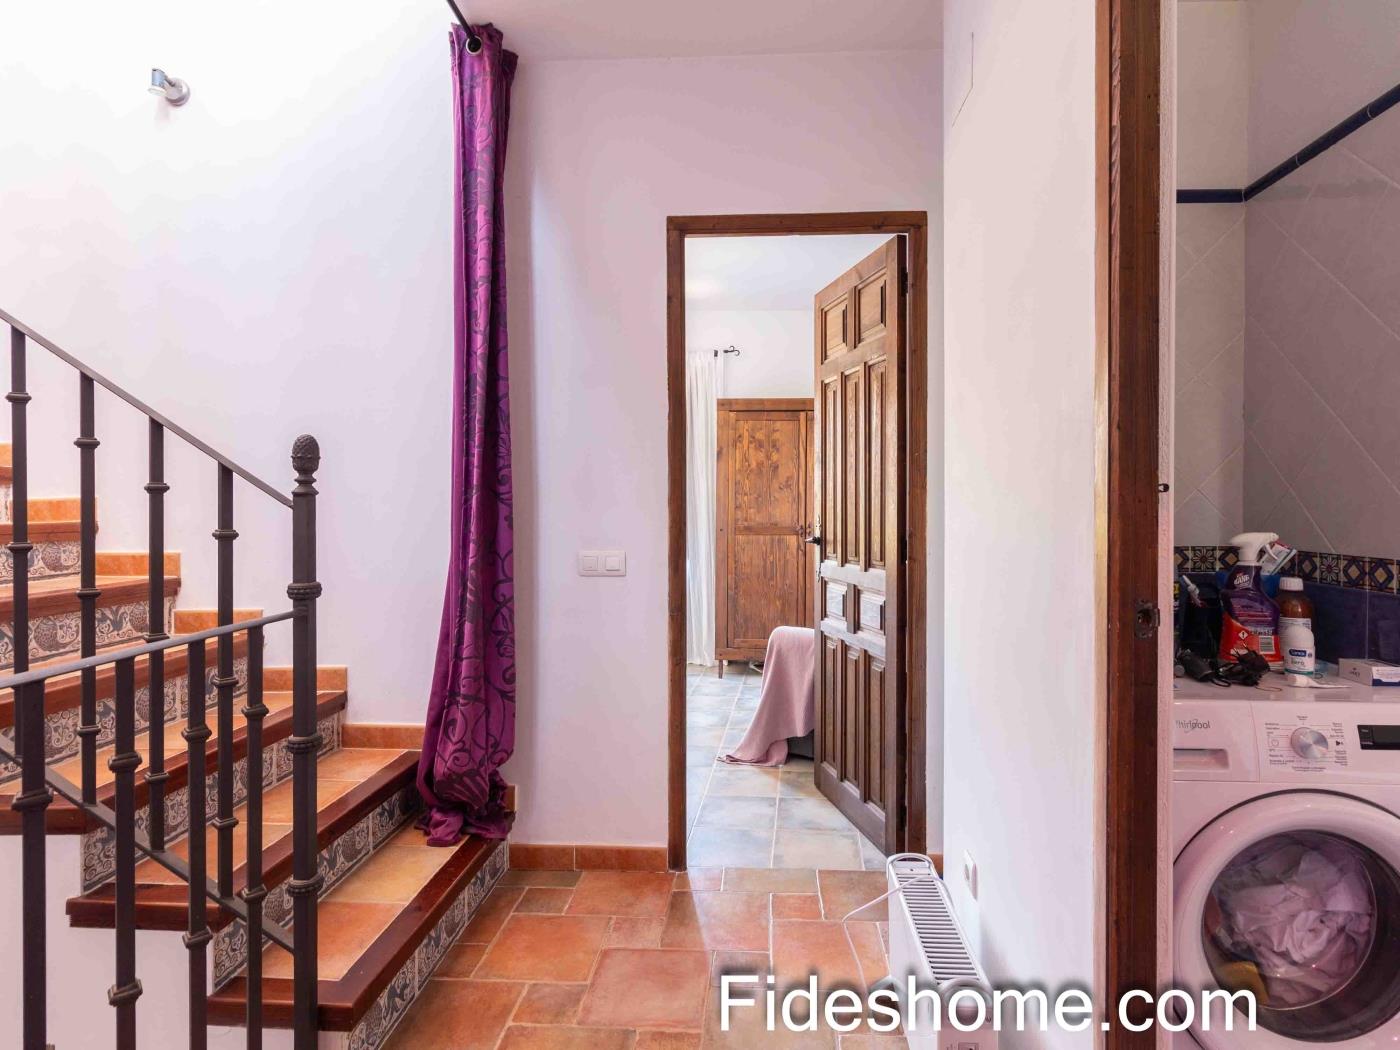 Large village house with pool, patio/garden, terraces and central heating in Pinos del Valle